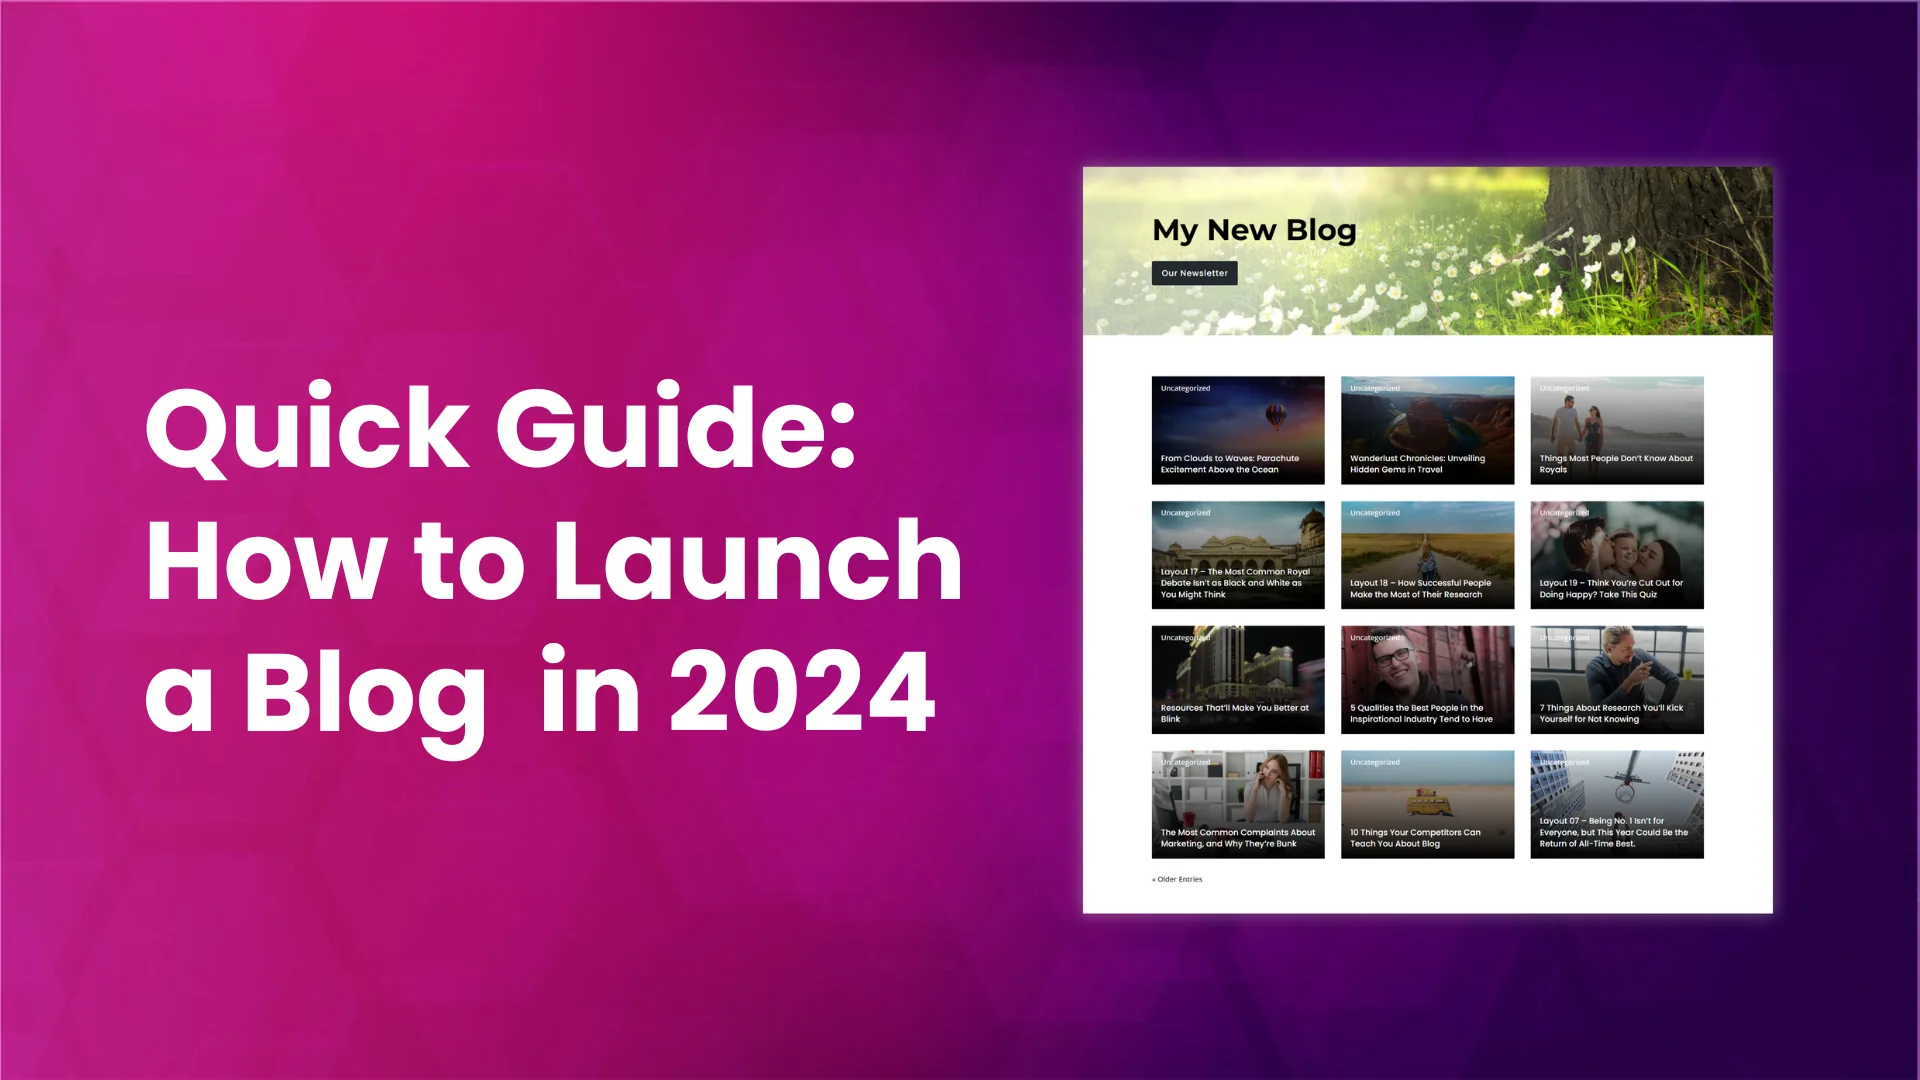 How to build a blog in 2024